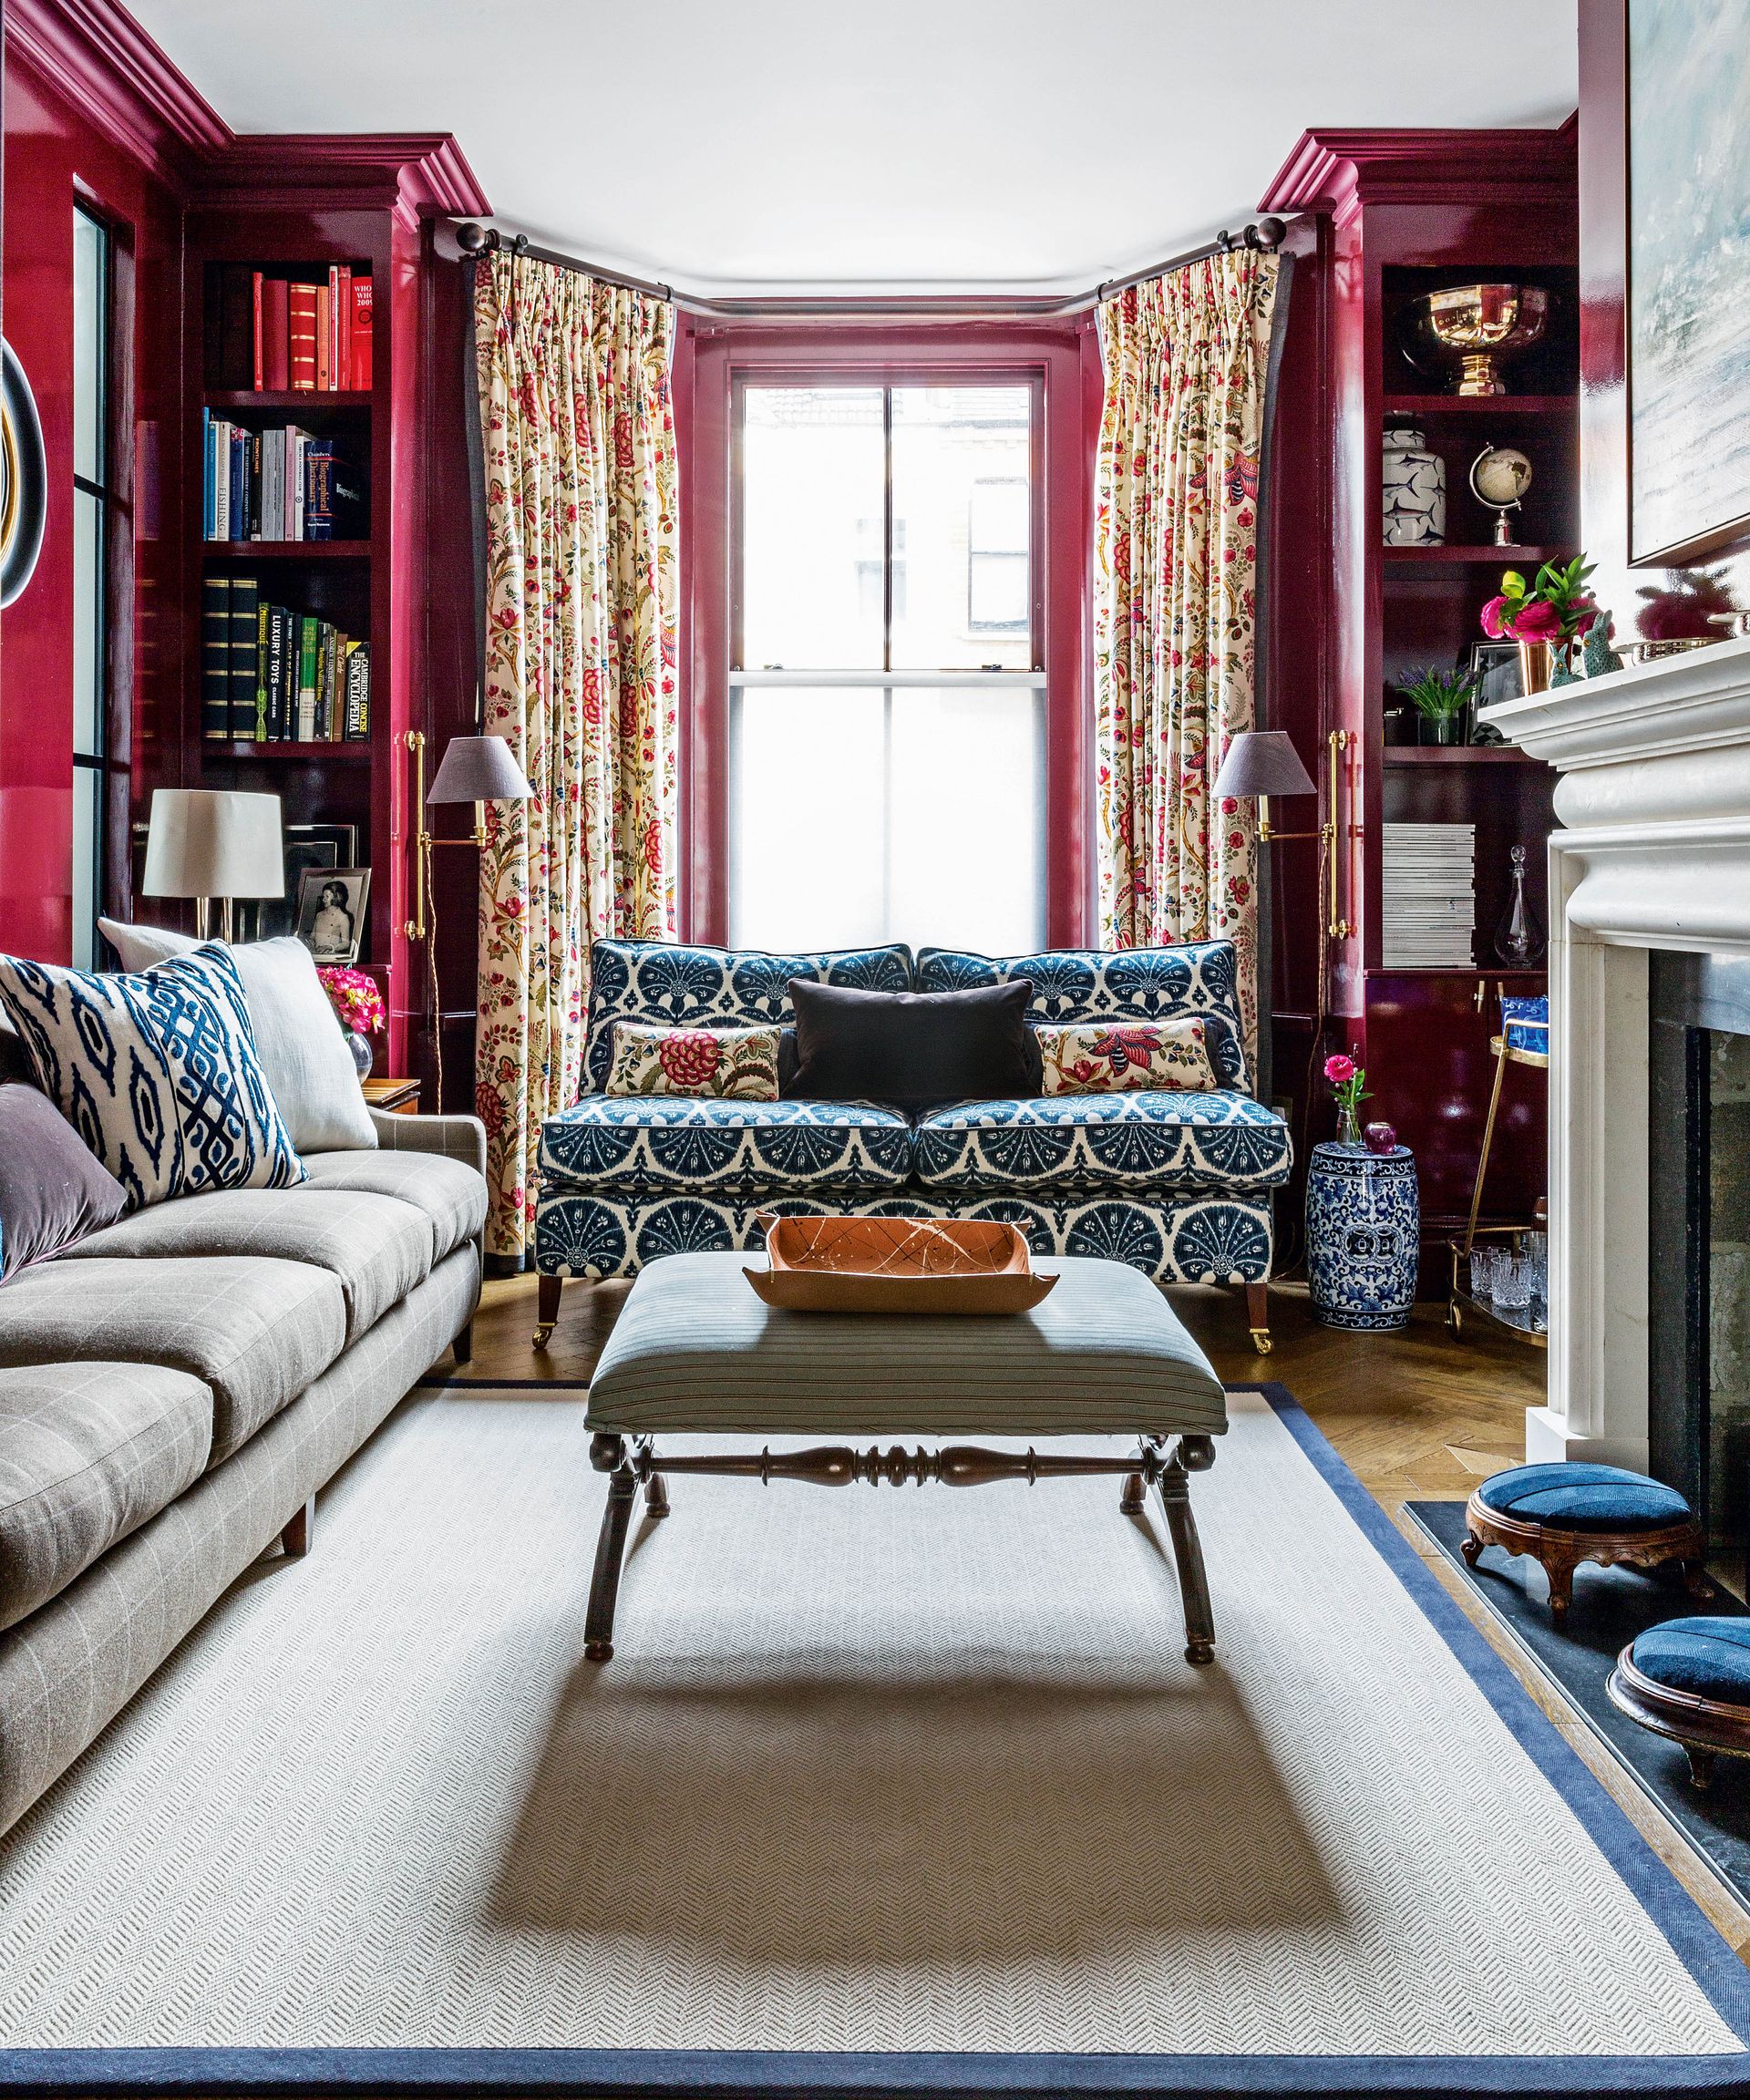 Psychologist reveals why you should avoid red in your living room ...